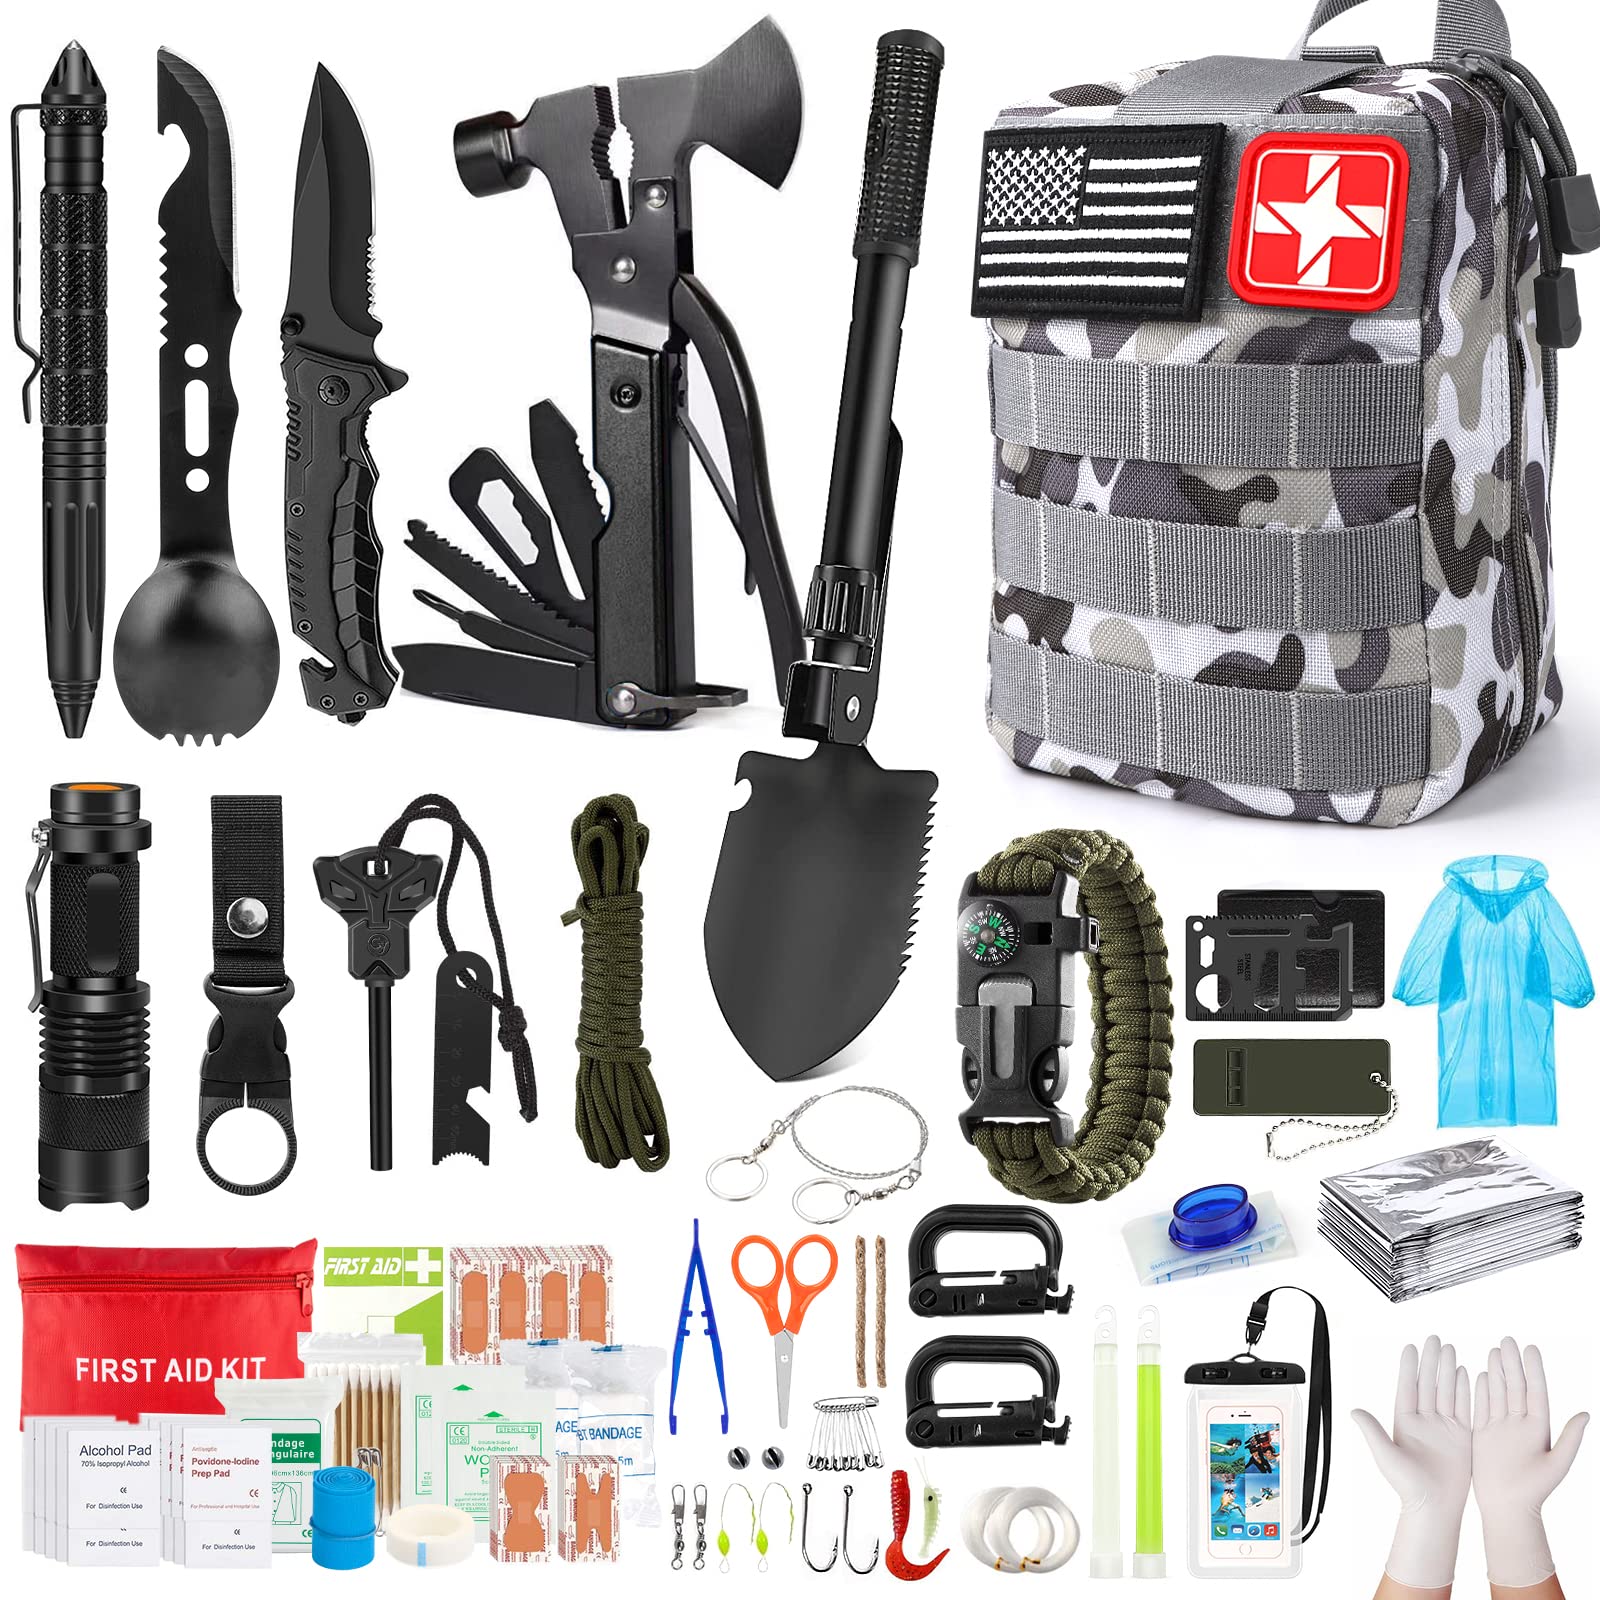 Survival Kit,222 PCS Emergency Survival Gear First Aid Kit with Molle  System Compatible Bag Outdoor Camping Gear Emergency Kit for Hunting,Hiking, Fishing, Gifts for Men Women